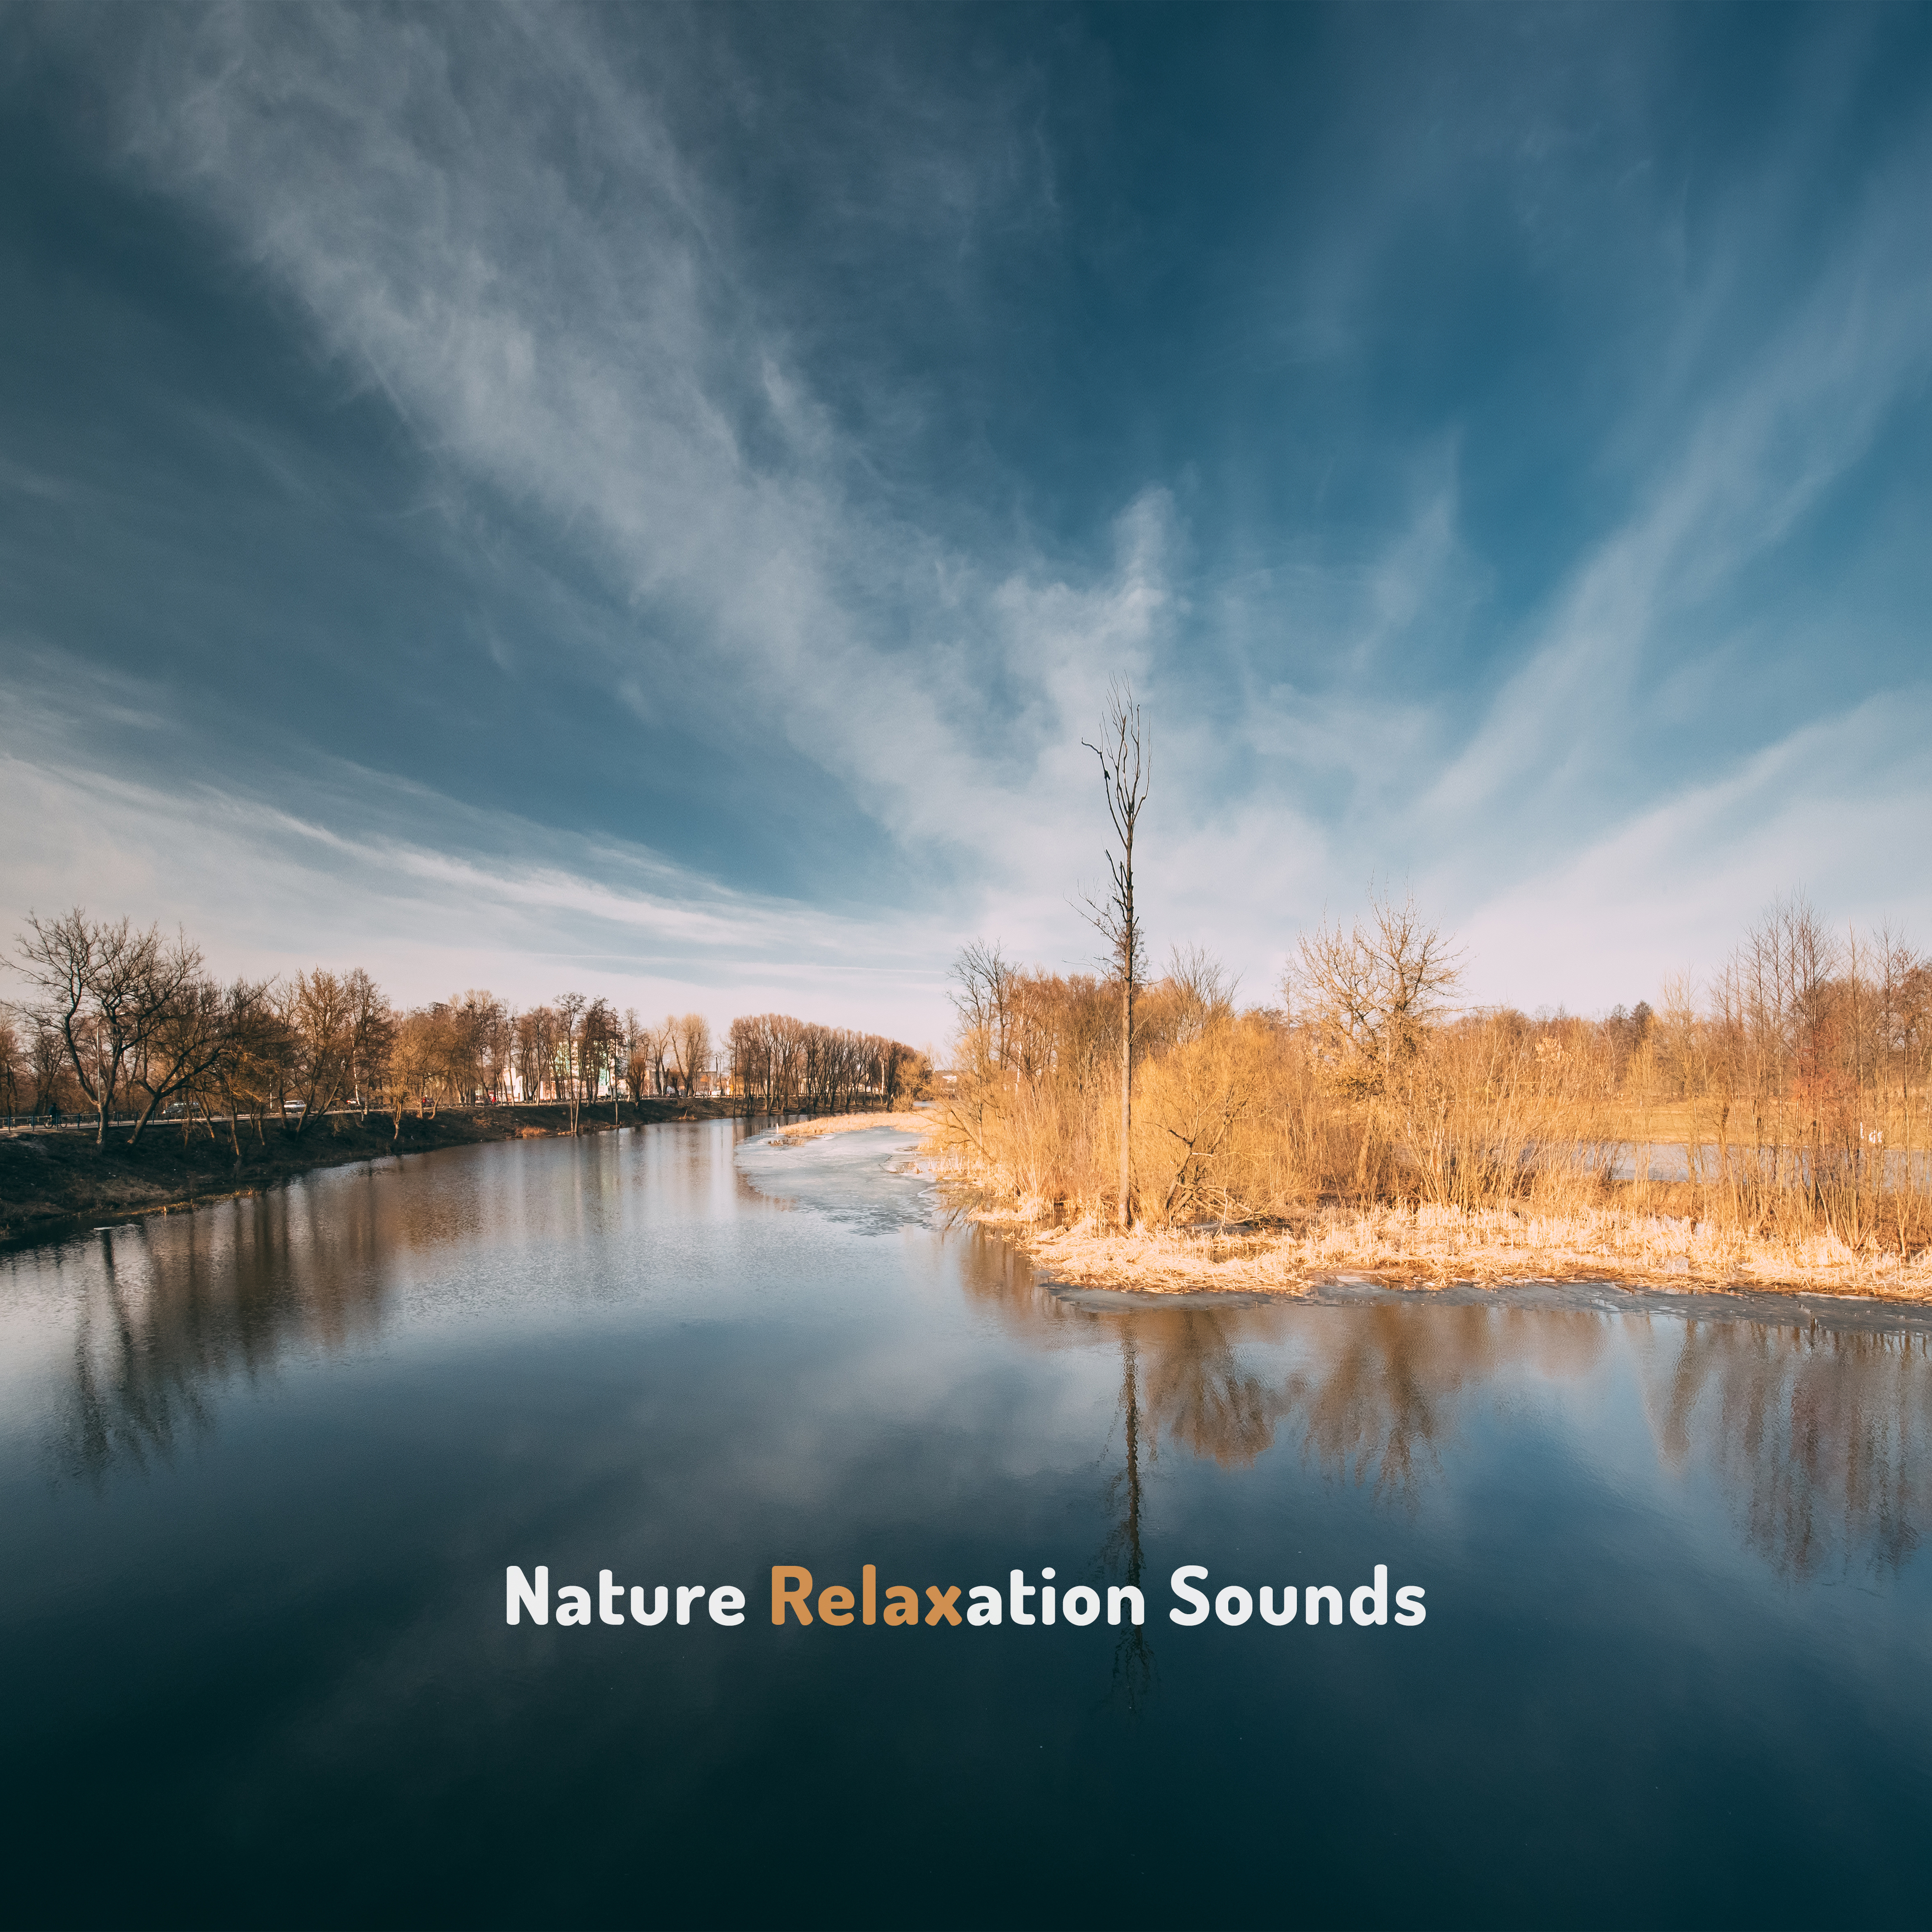 Nature Relaxation Sounds